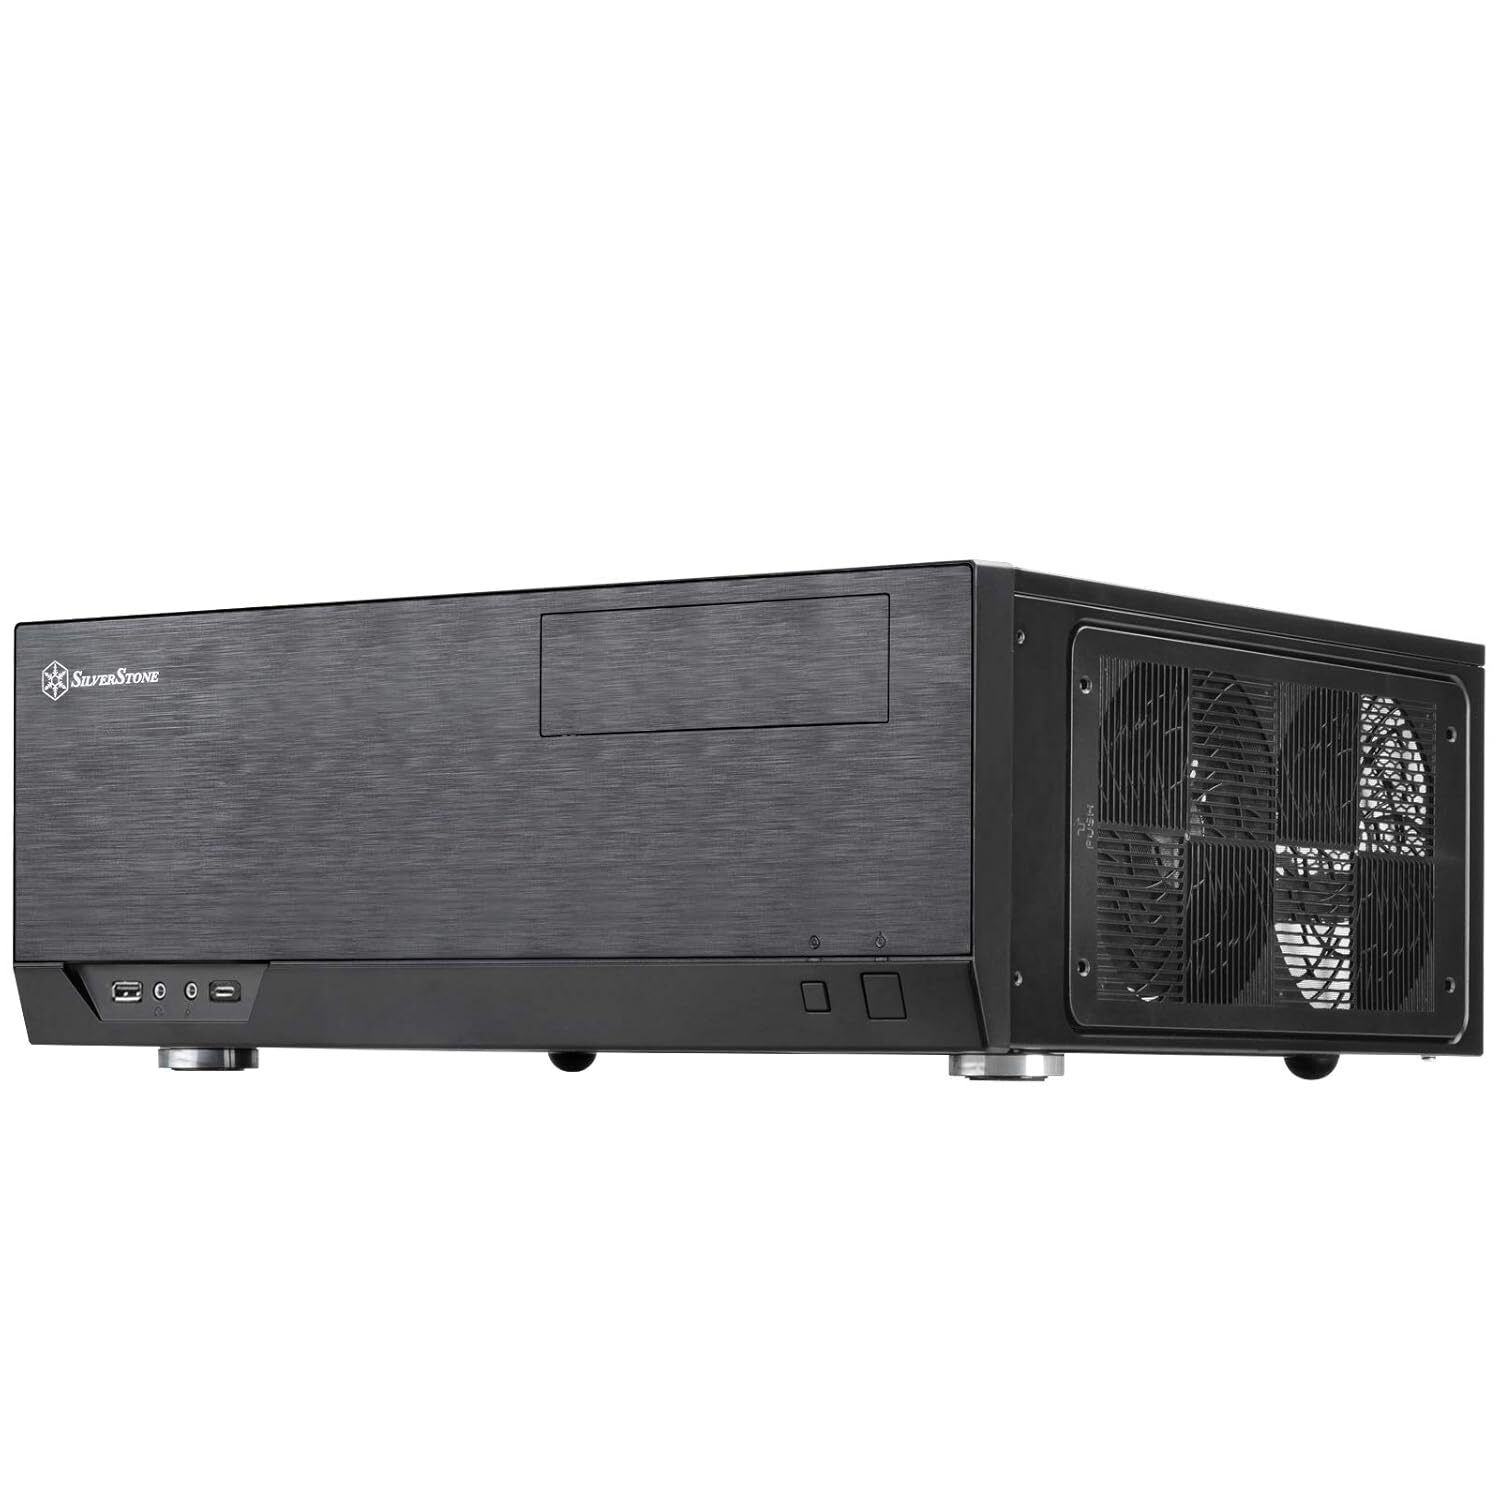 SilverStone Technology Home Theater Computer Case (HTPC) with Faux Aluminum De